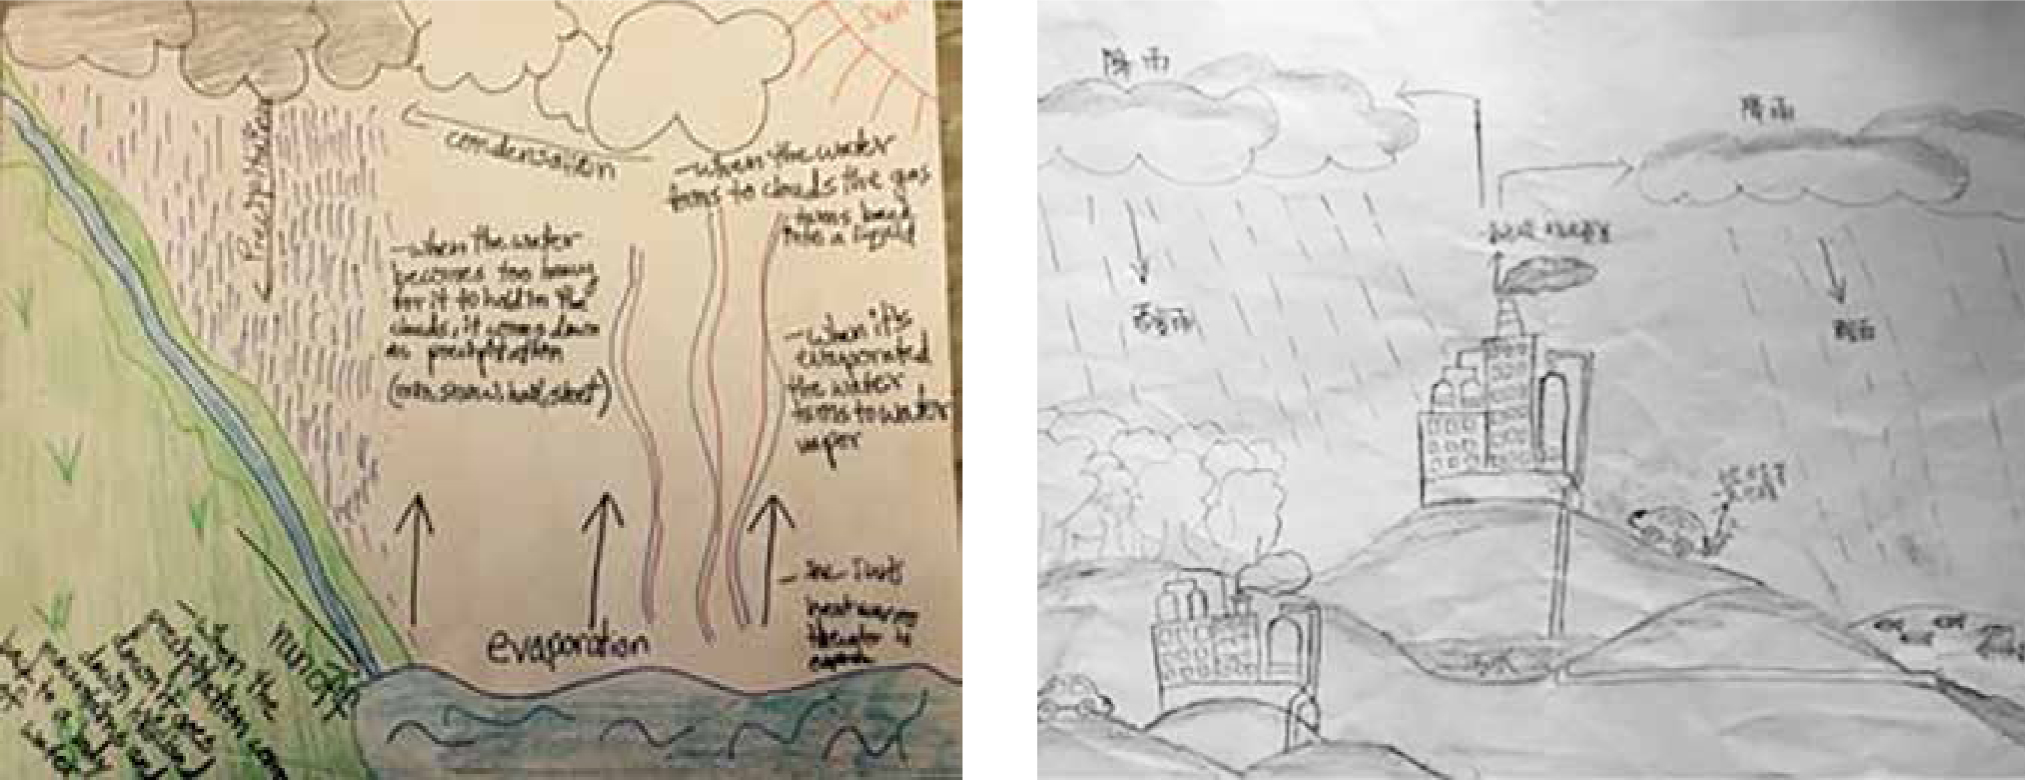 Examples of student-created water cycle models in the United States and China